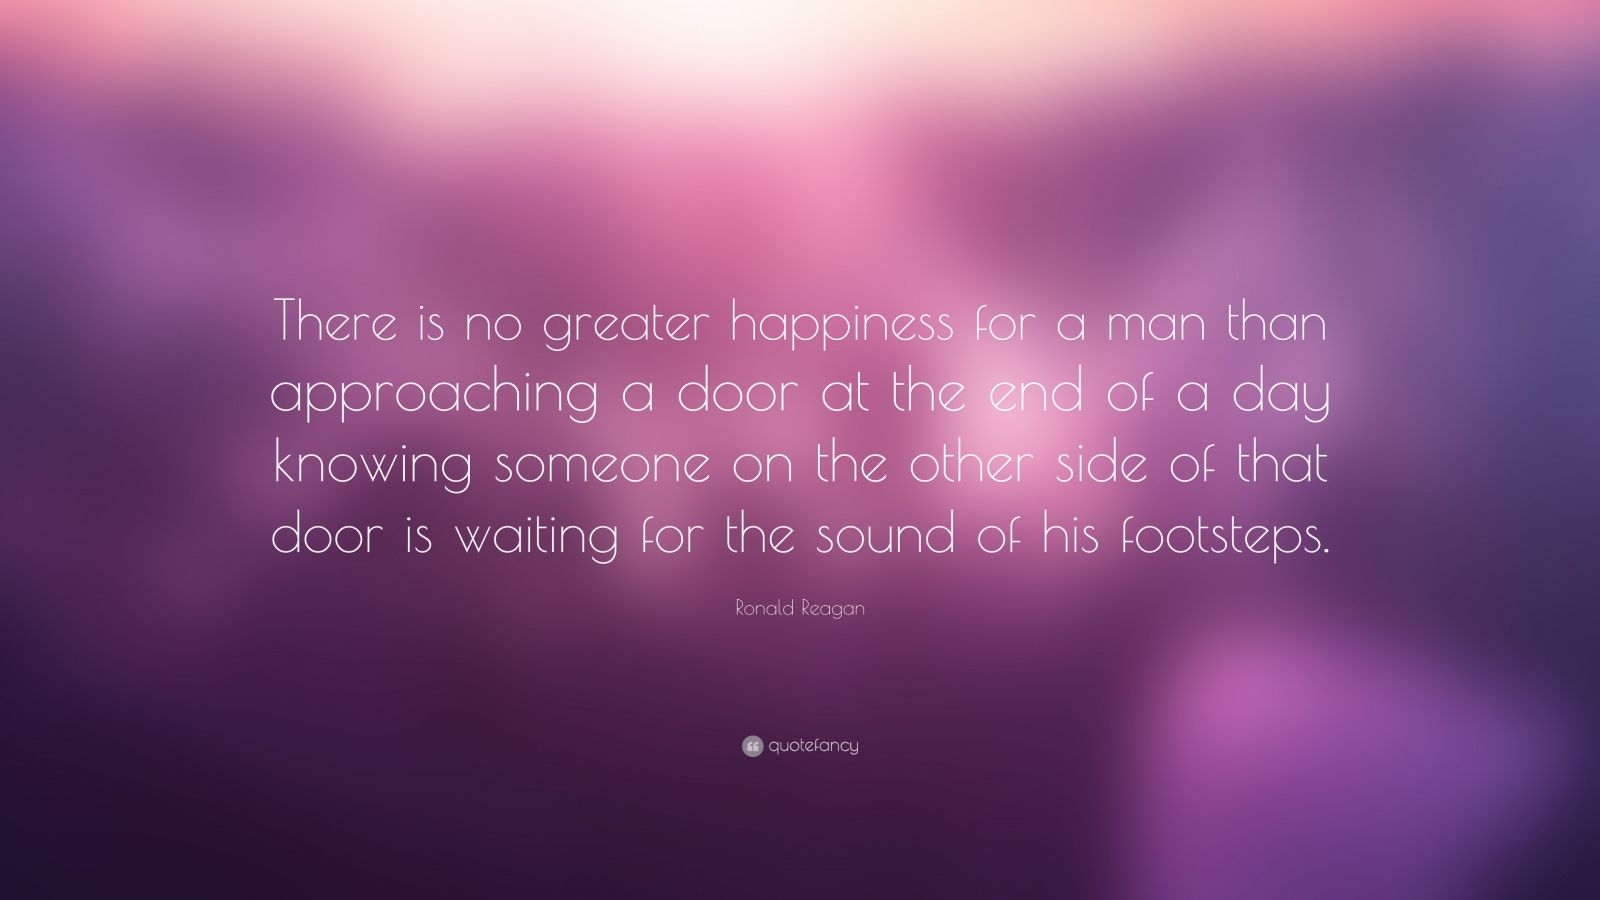 39661 Ronald Reagan Quote There is no greater happiness for a man than